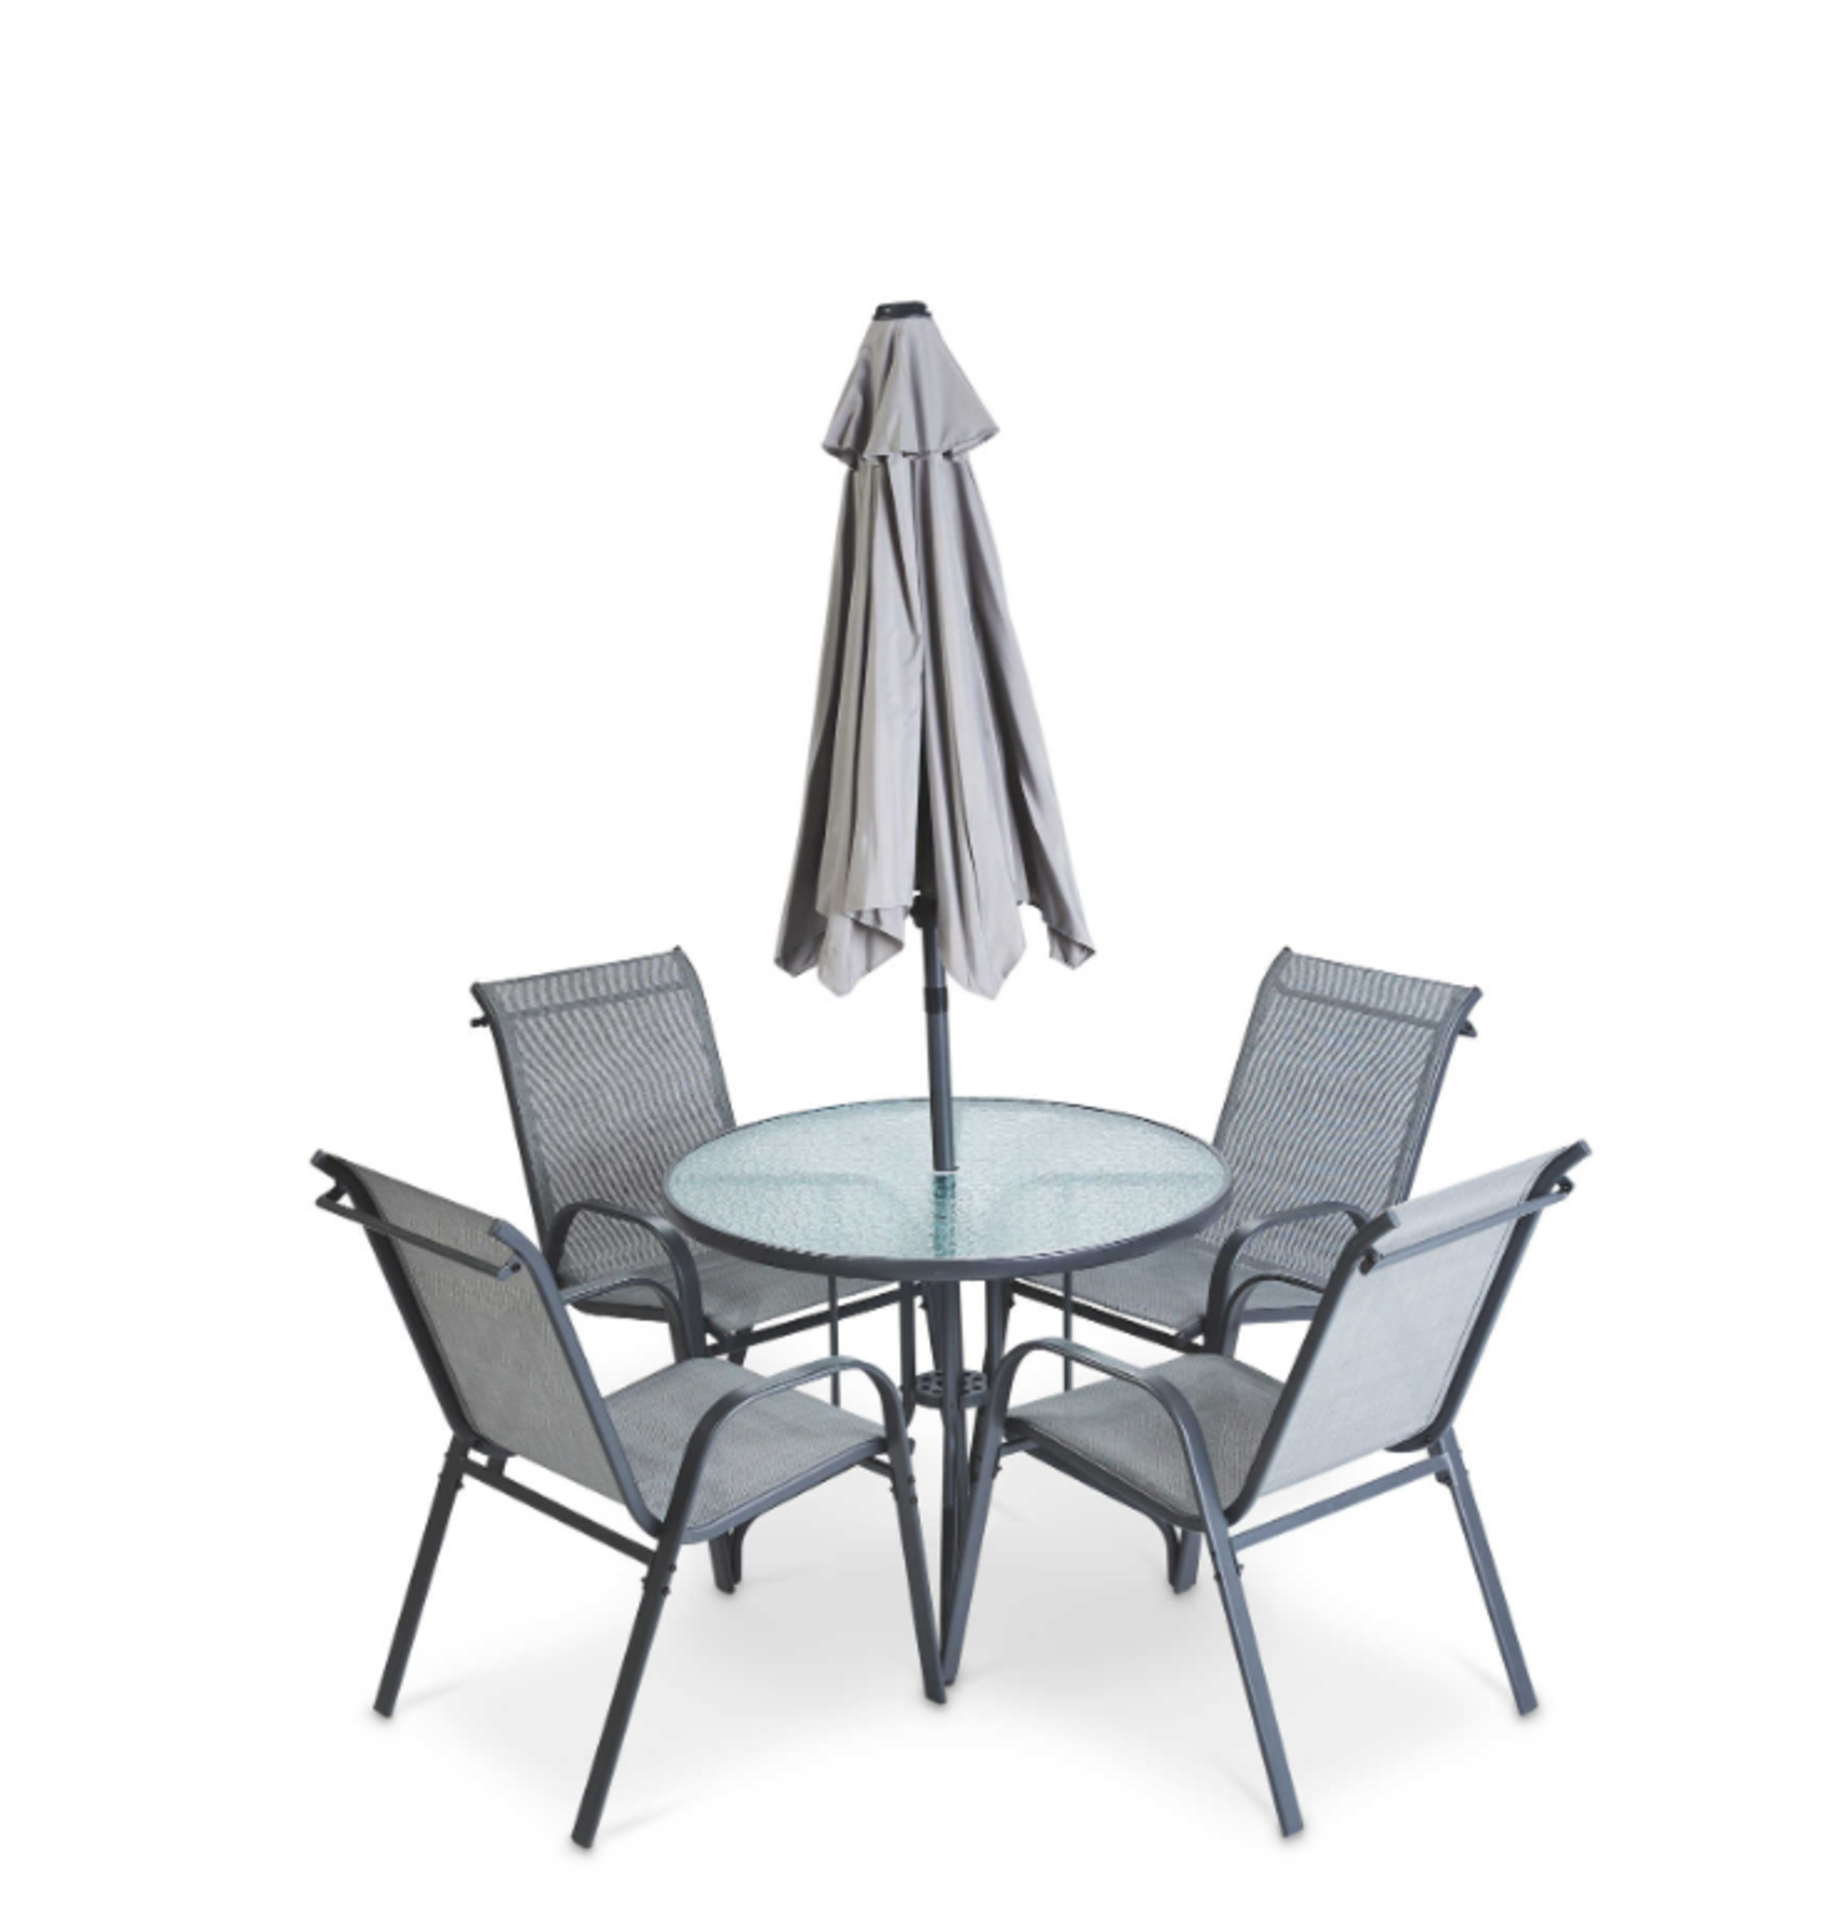 6 Piece Patio Furniture Set. Give your garden a new look with the 6 Piece Patio Furniture Set. - Image 2 of 5